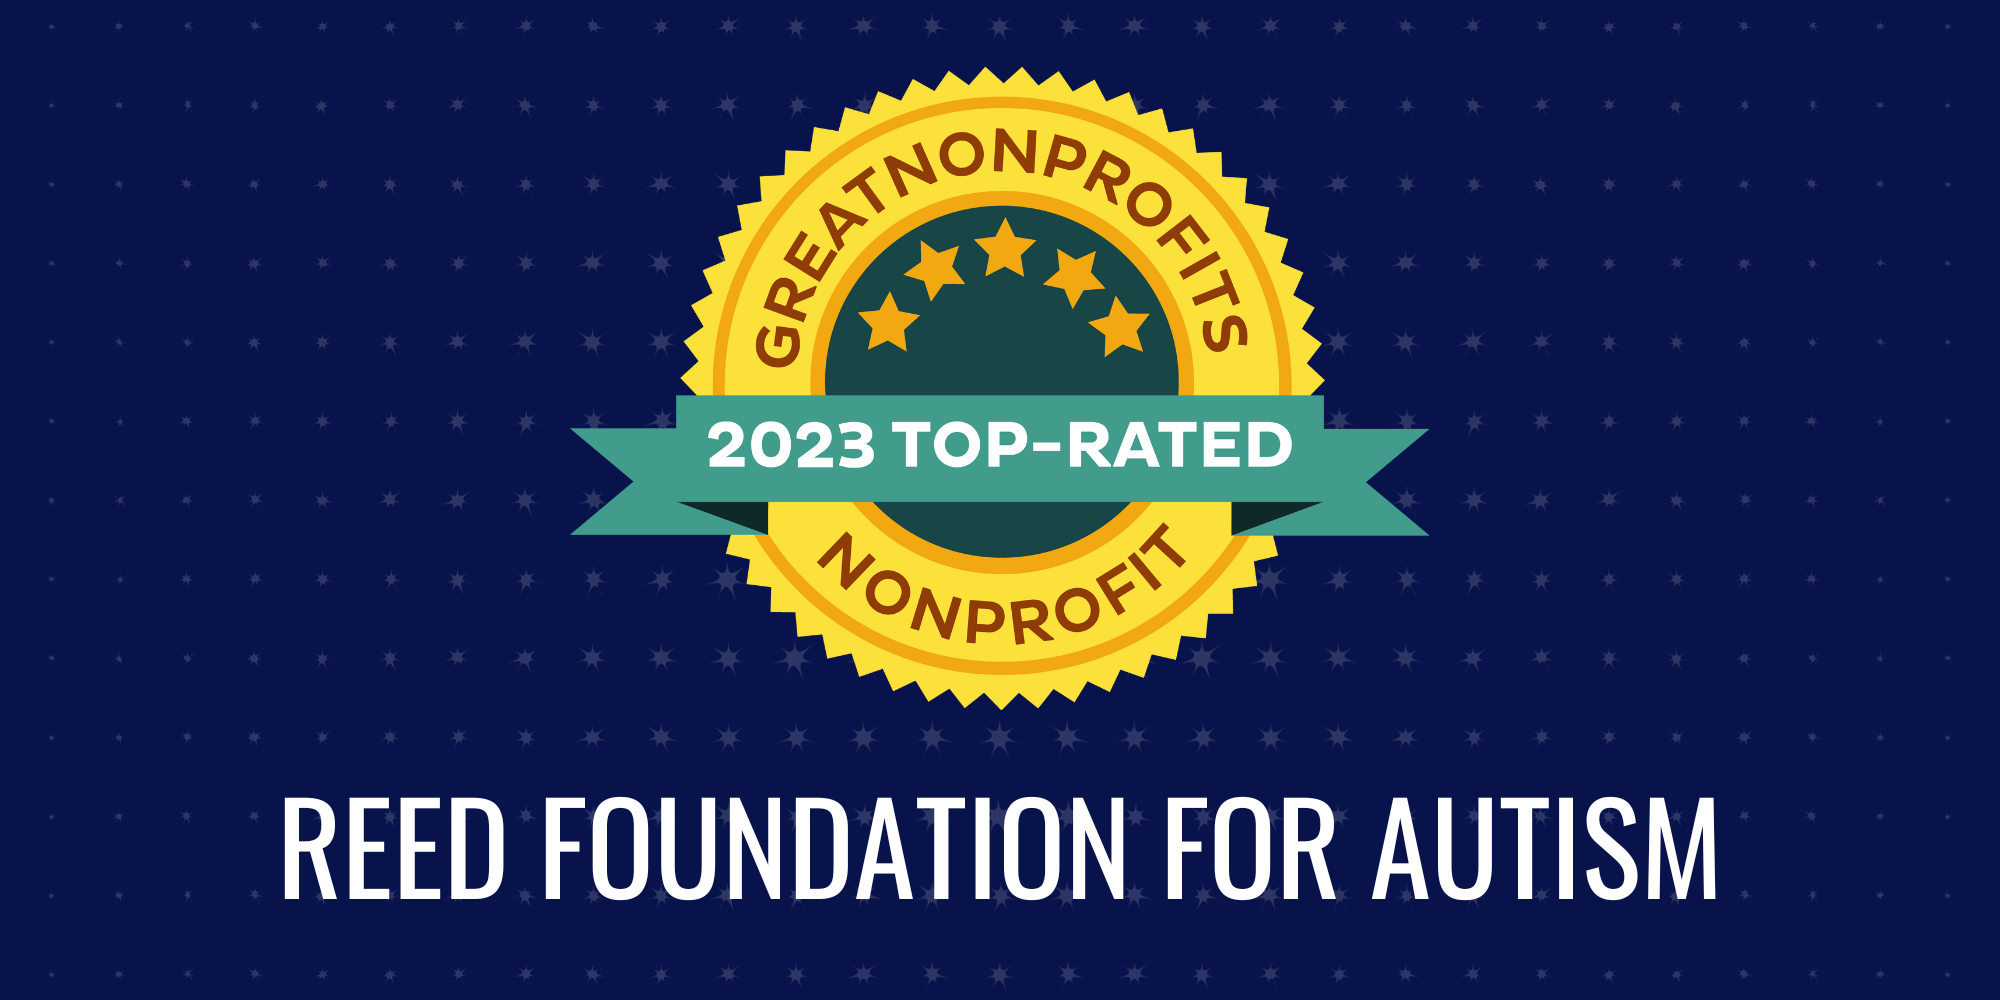 Best Top-Rated Nonprofits 